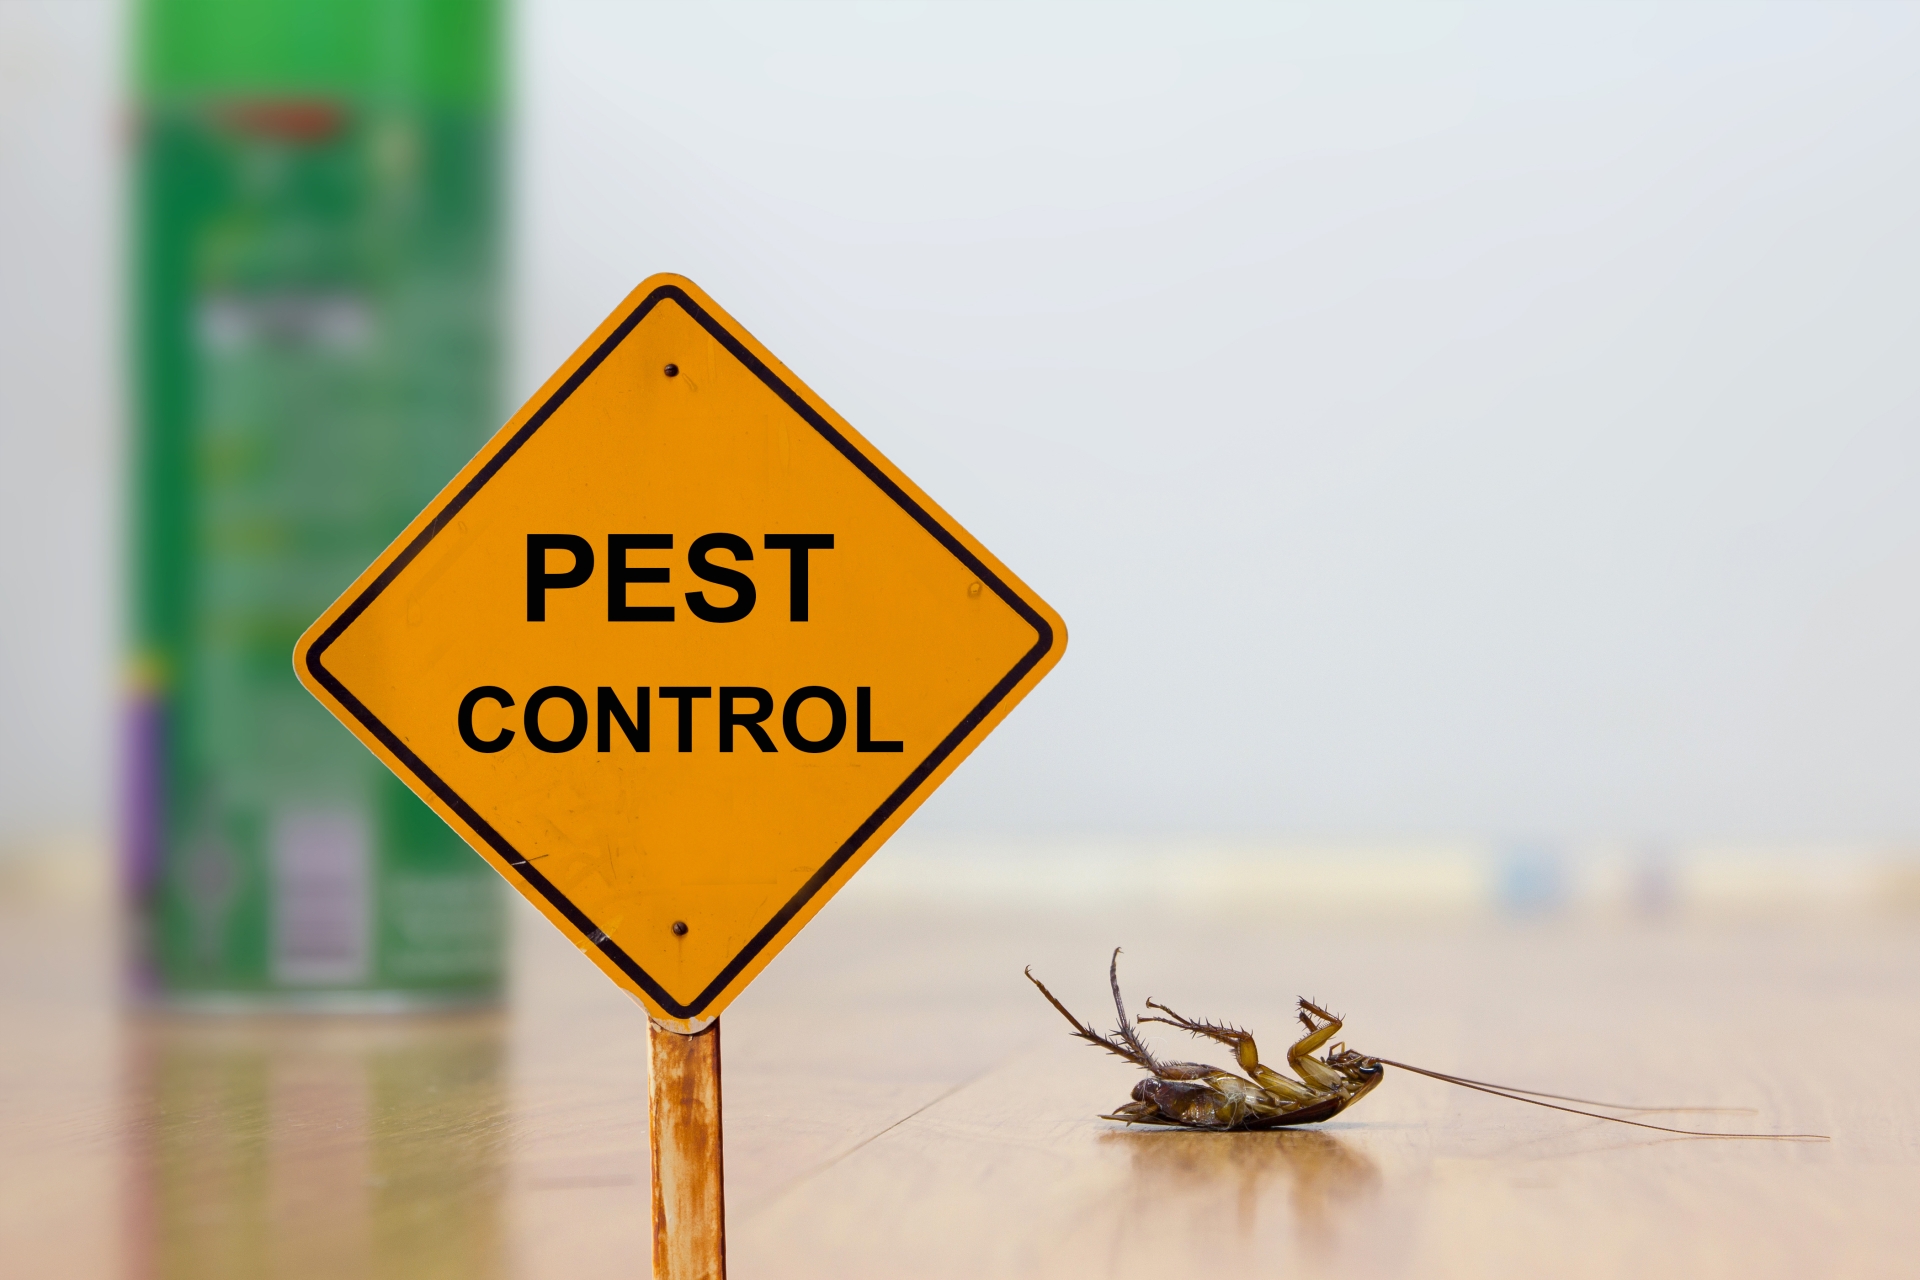 24 Hour Pest Control, Pest Control in Balham, SW12. Call Now 020 8166 9746